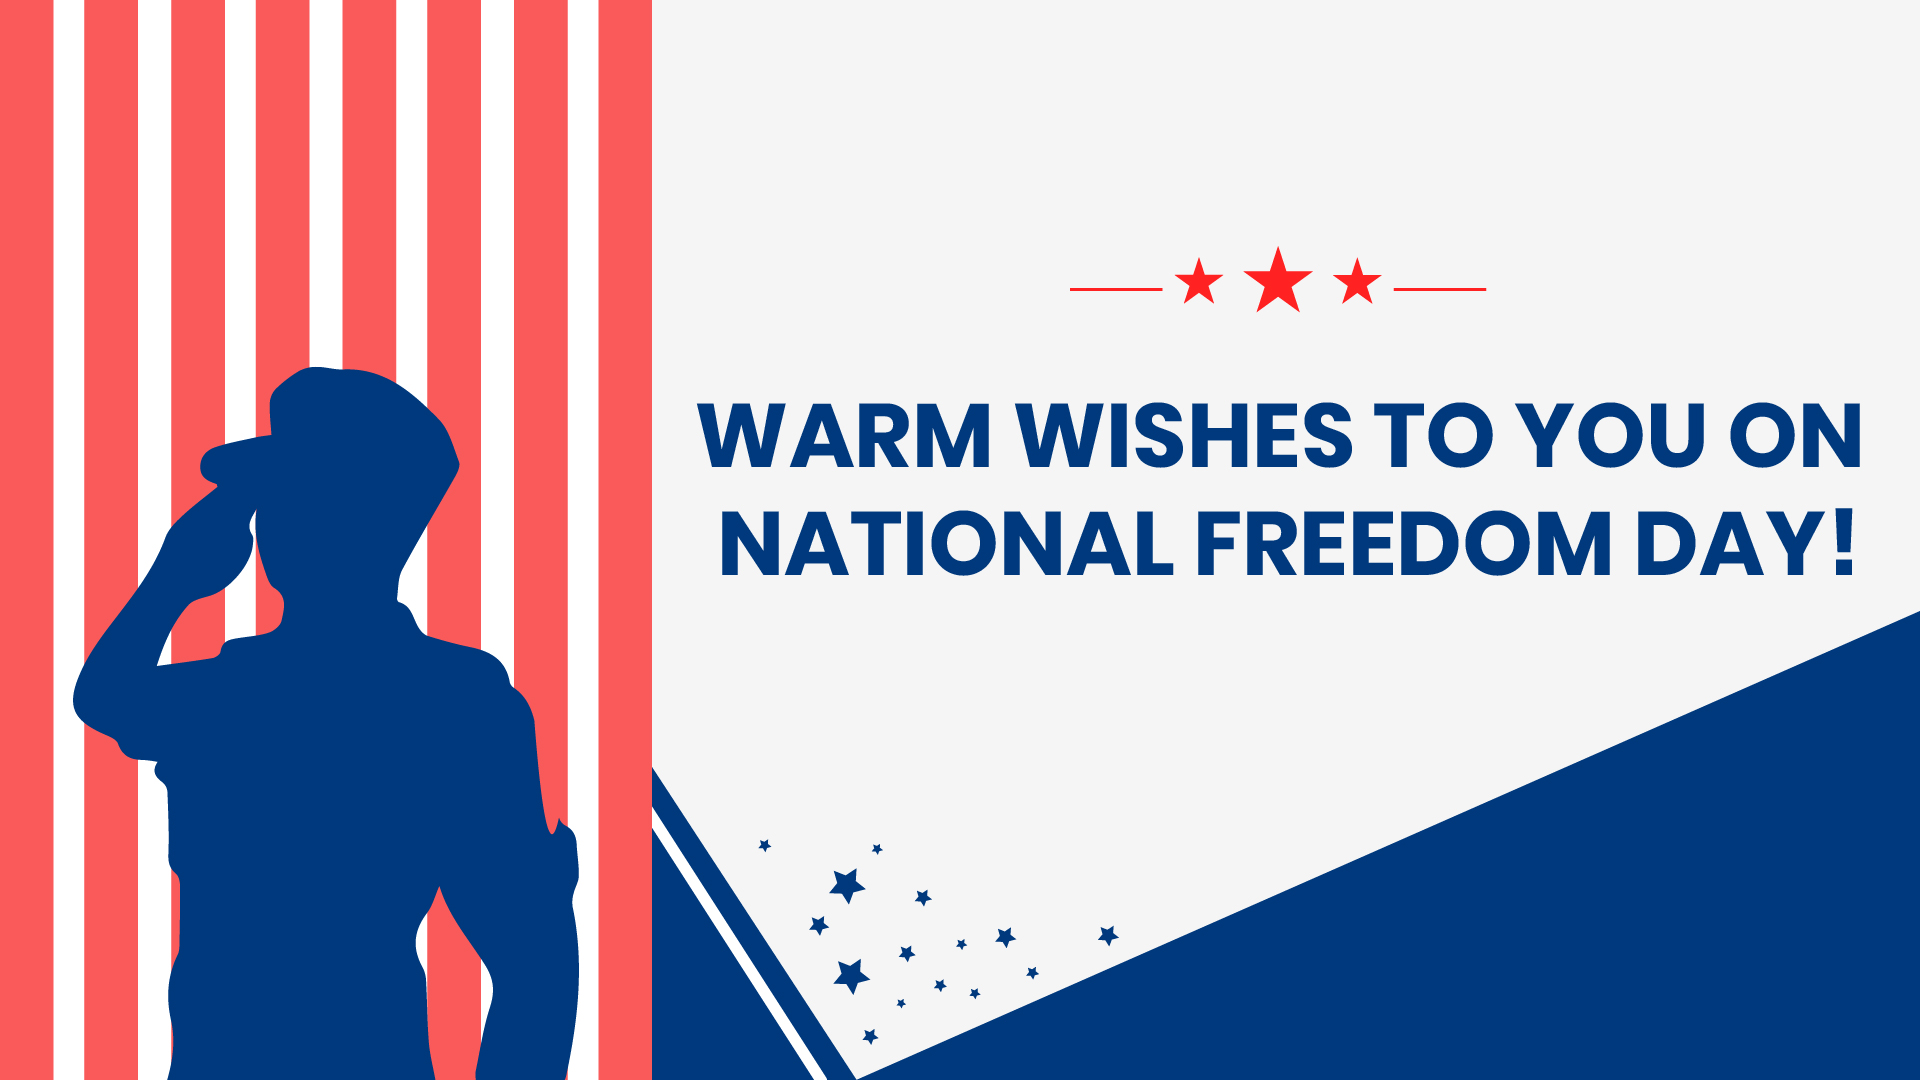 Free National Freedom Day Wishes Background in PDF, Illustrator, PSD, EPS, SVG, JPG, PNG